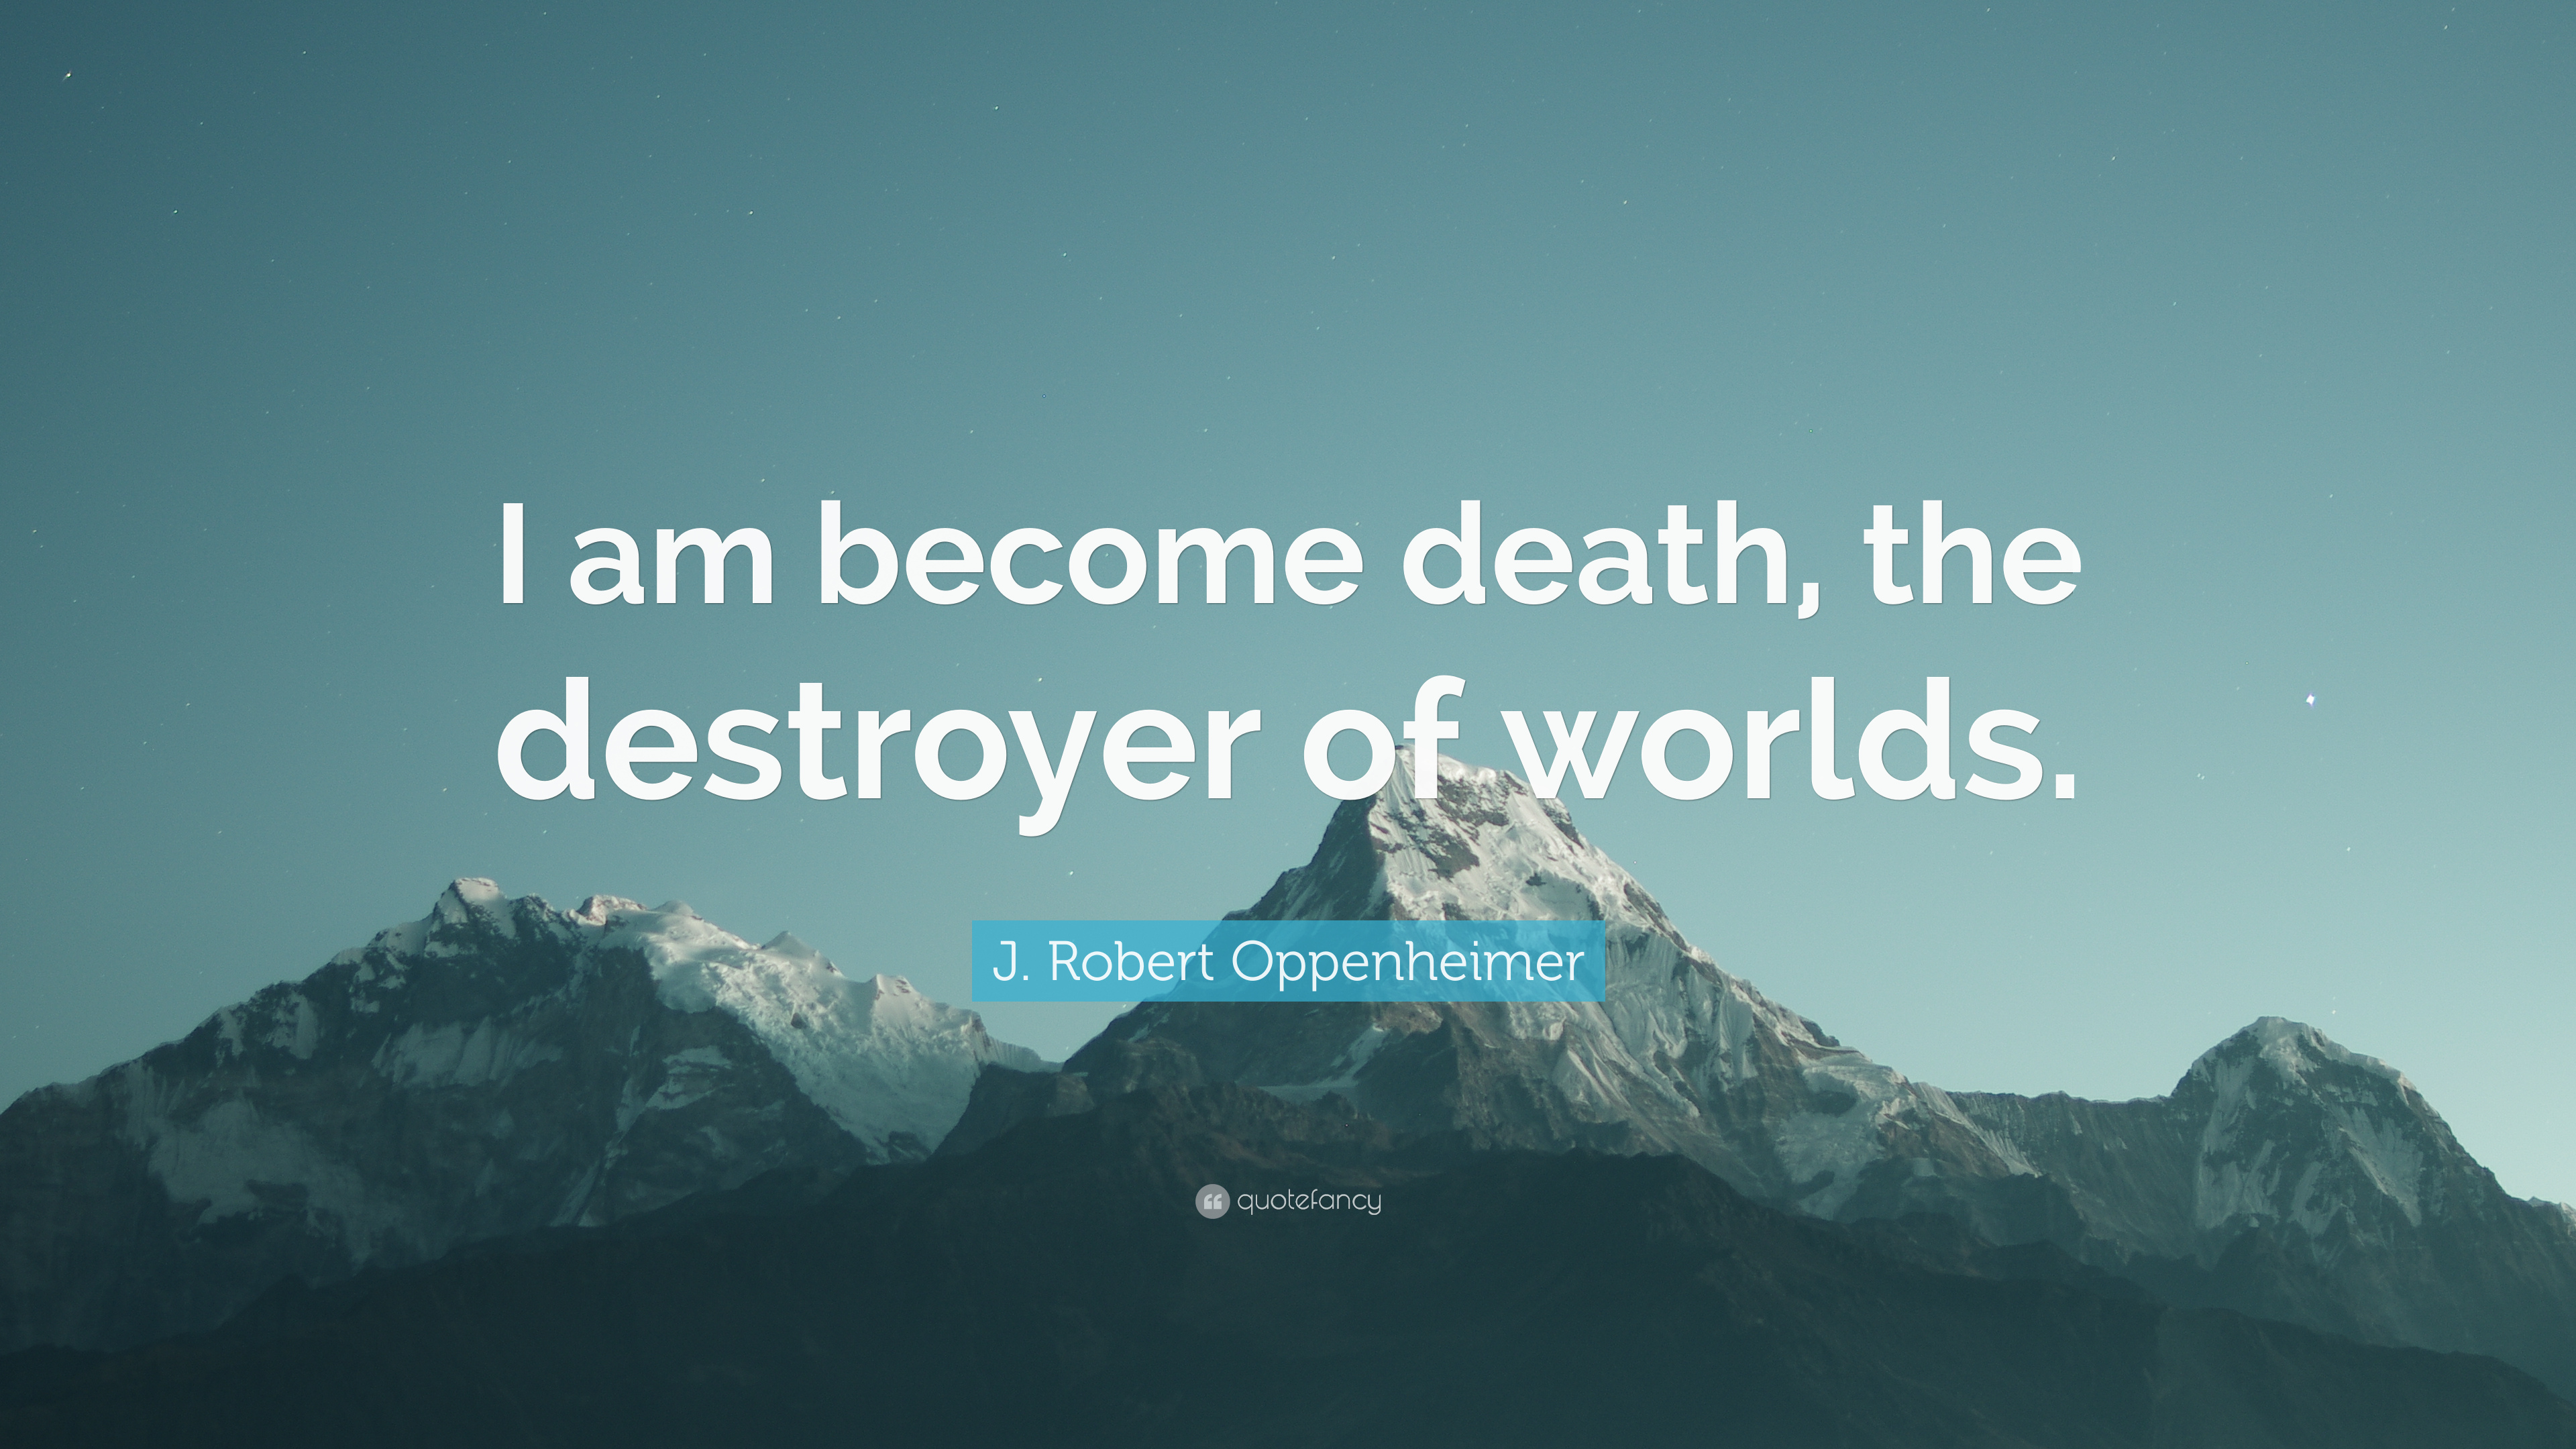 J. Robert Oppenheimer Quote: “I am become death, the destroyer of worlds.”